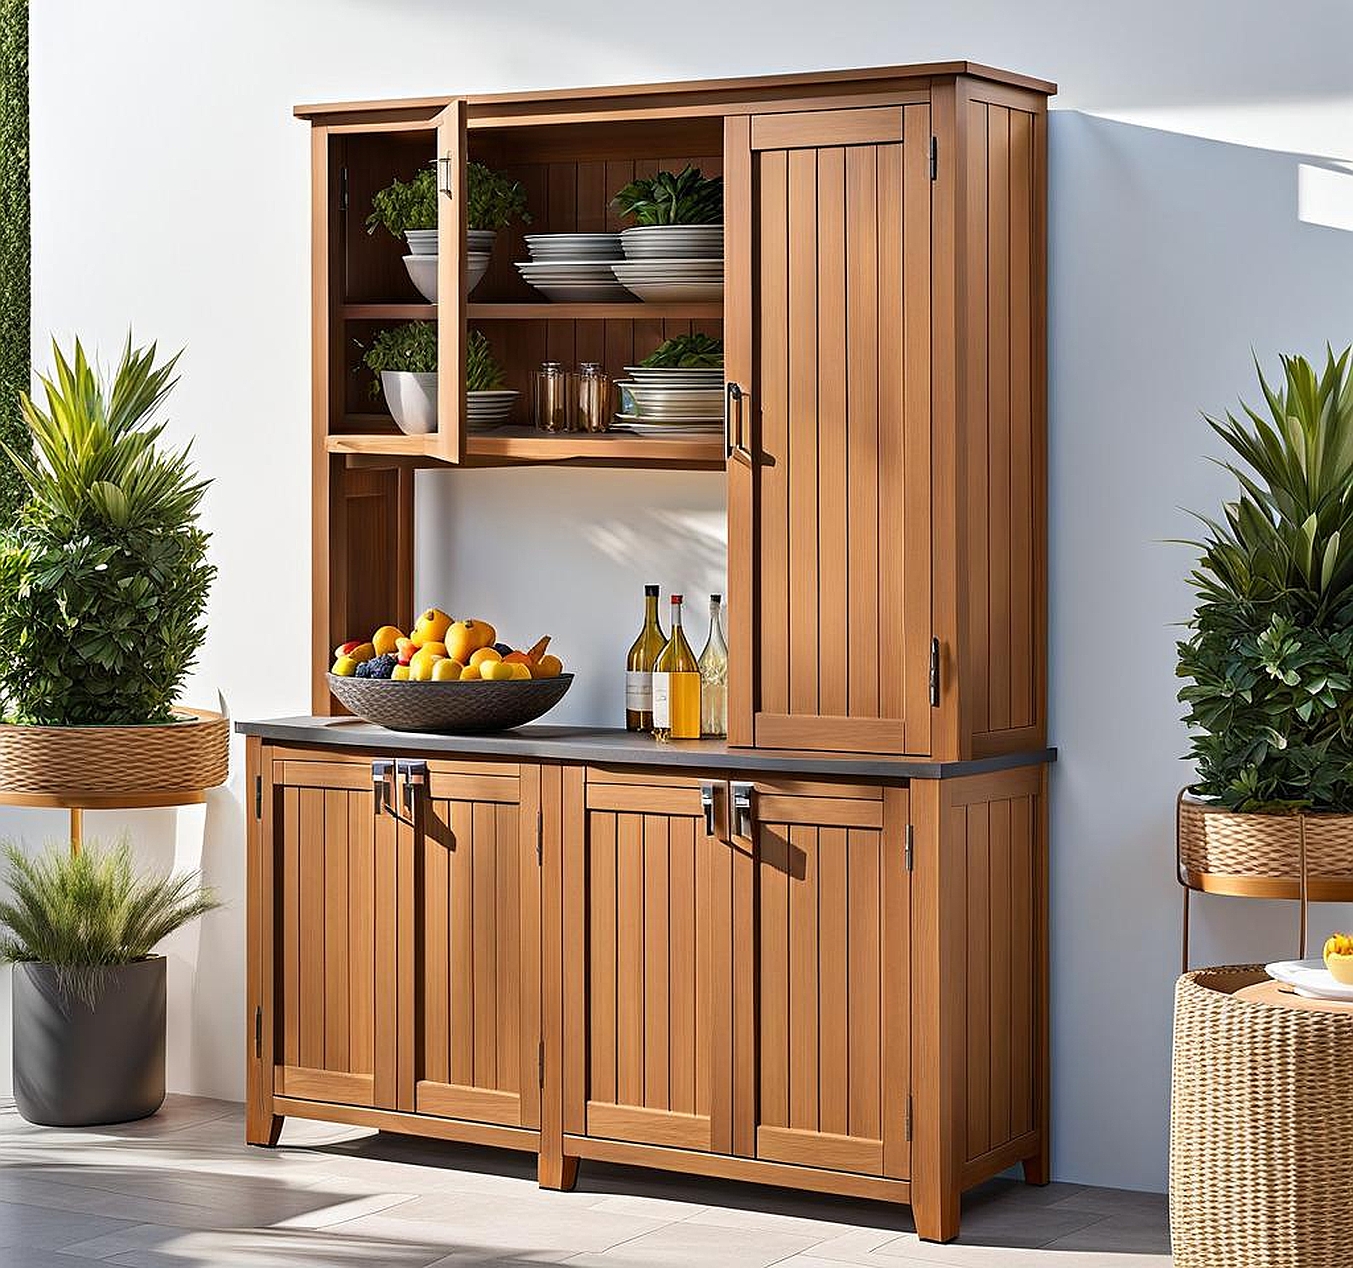 Everything You Need to Know About Weatherproof Outdoor Buffet Cabinets